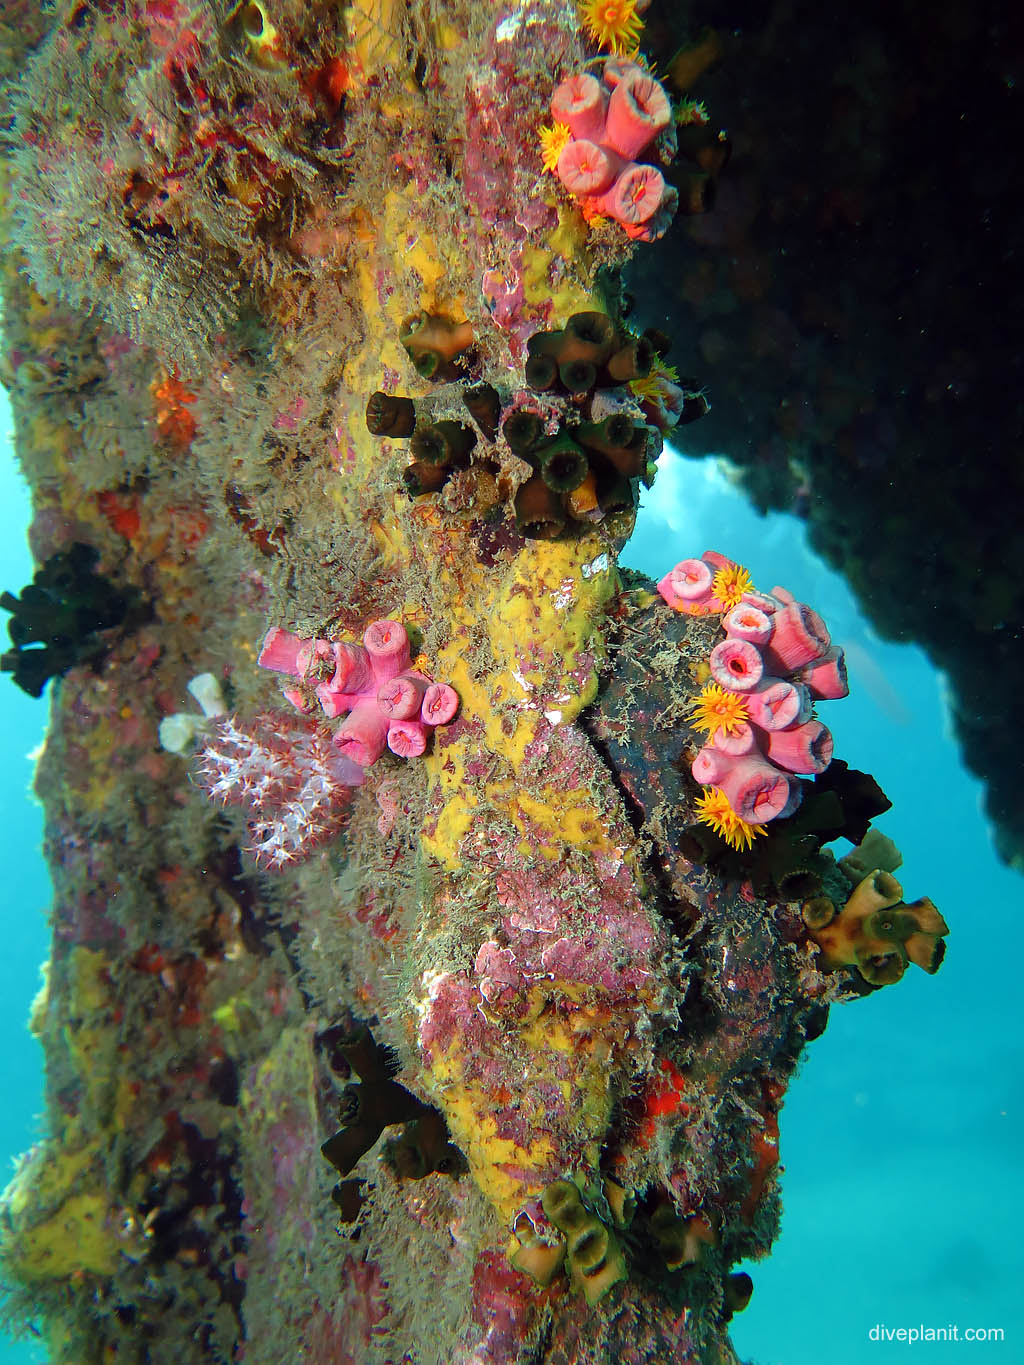 Colourful things at Bonegi 2 diving Honiara in the Solomon Islands by Diveplanit